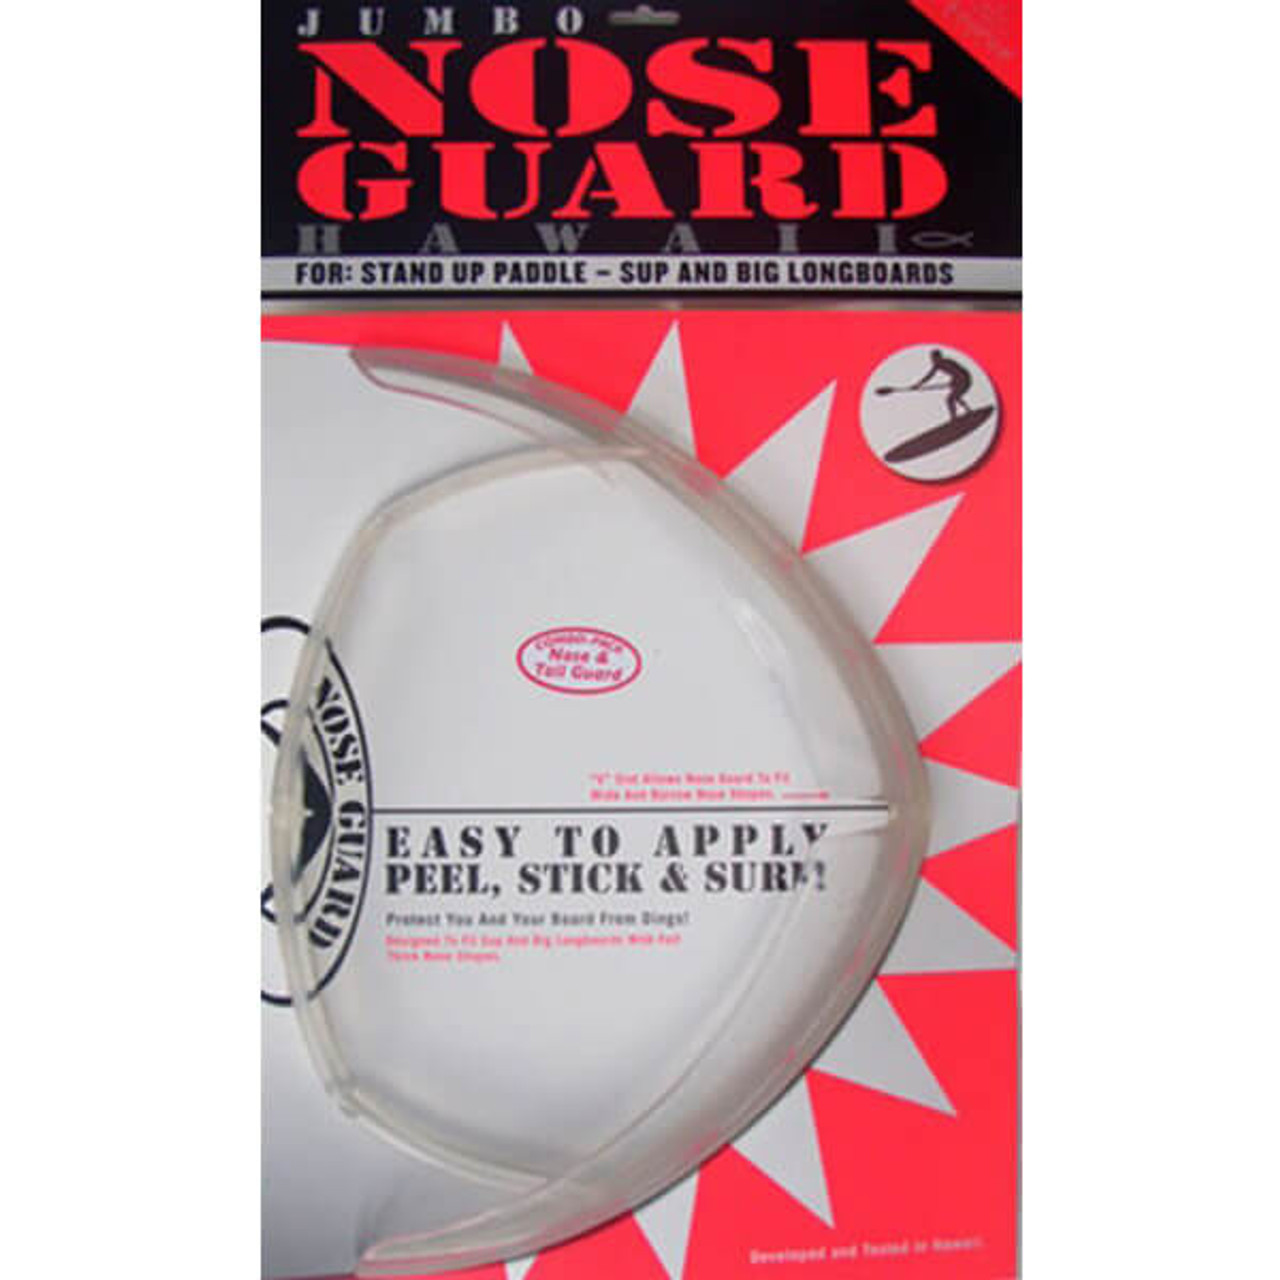 Jumbo Nose Guard for SUP and big longboards